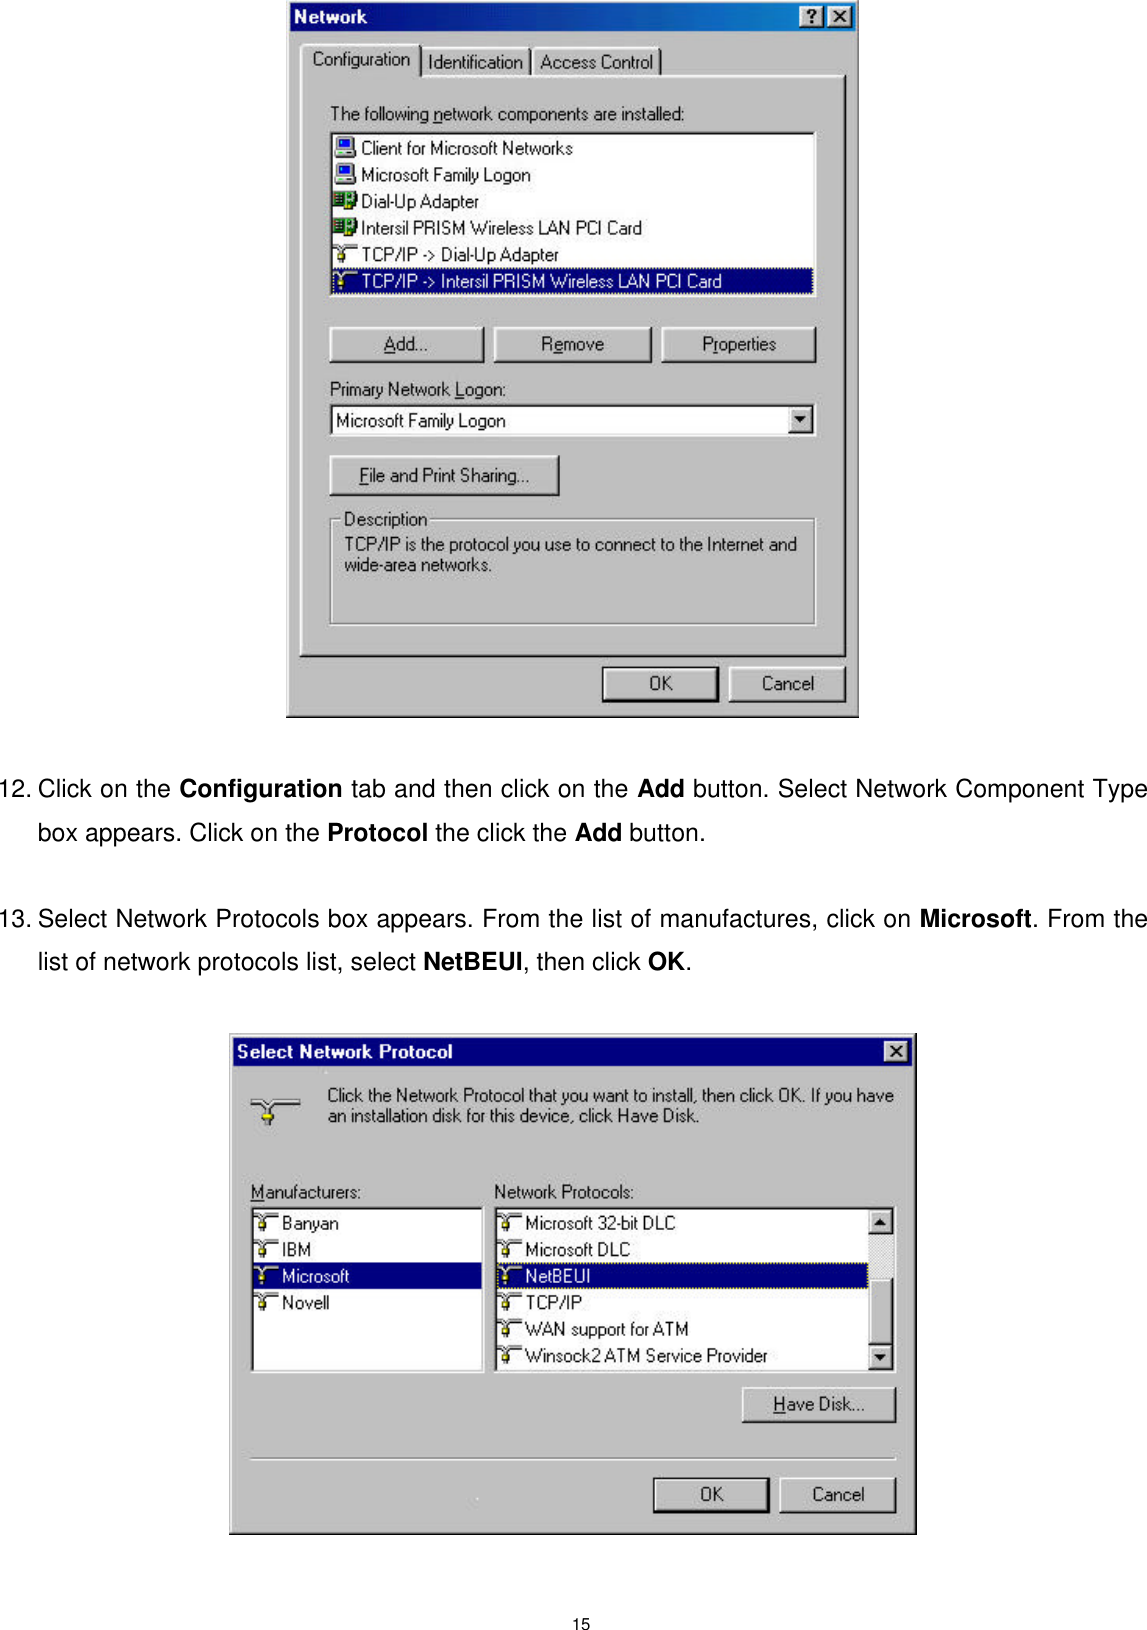  15   12. Click on the Configuration tab and then click on the Add button. Select Network Component Type box appears. Click on the Protocol the click the Add button.  13. Select Network Protocols box appears. From the list of manufactures, click on Microsoft. From the list of network protocols list, select NetBEUI, then click OK.     